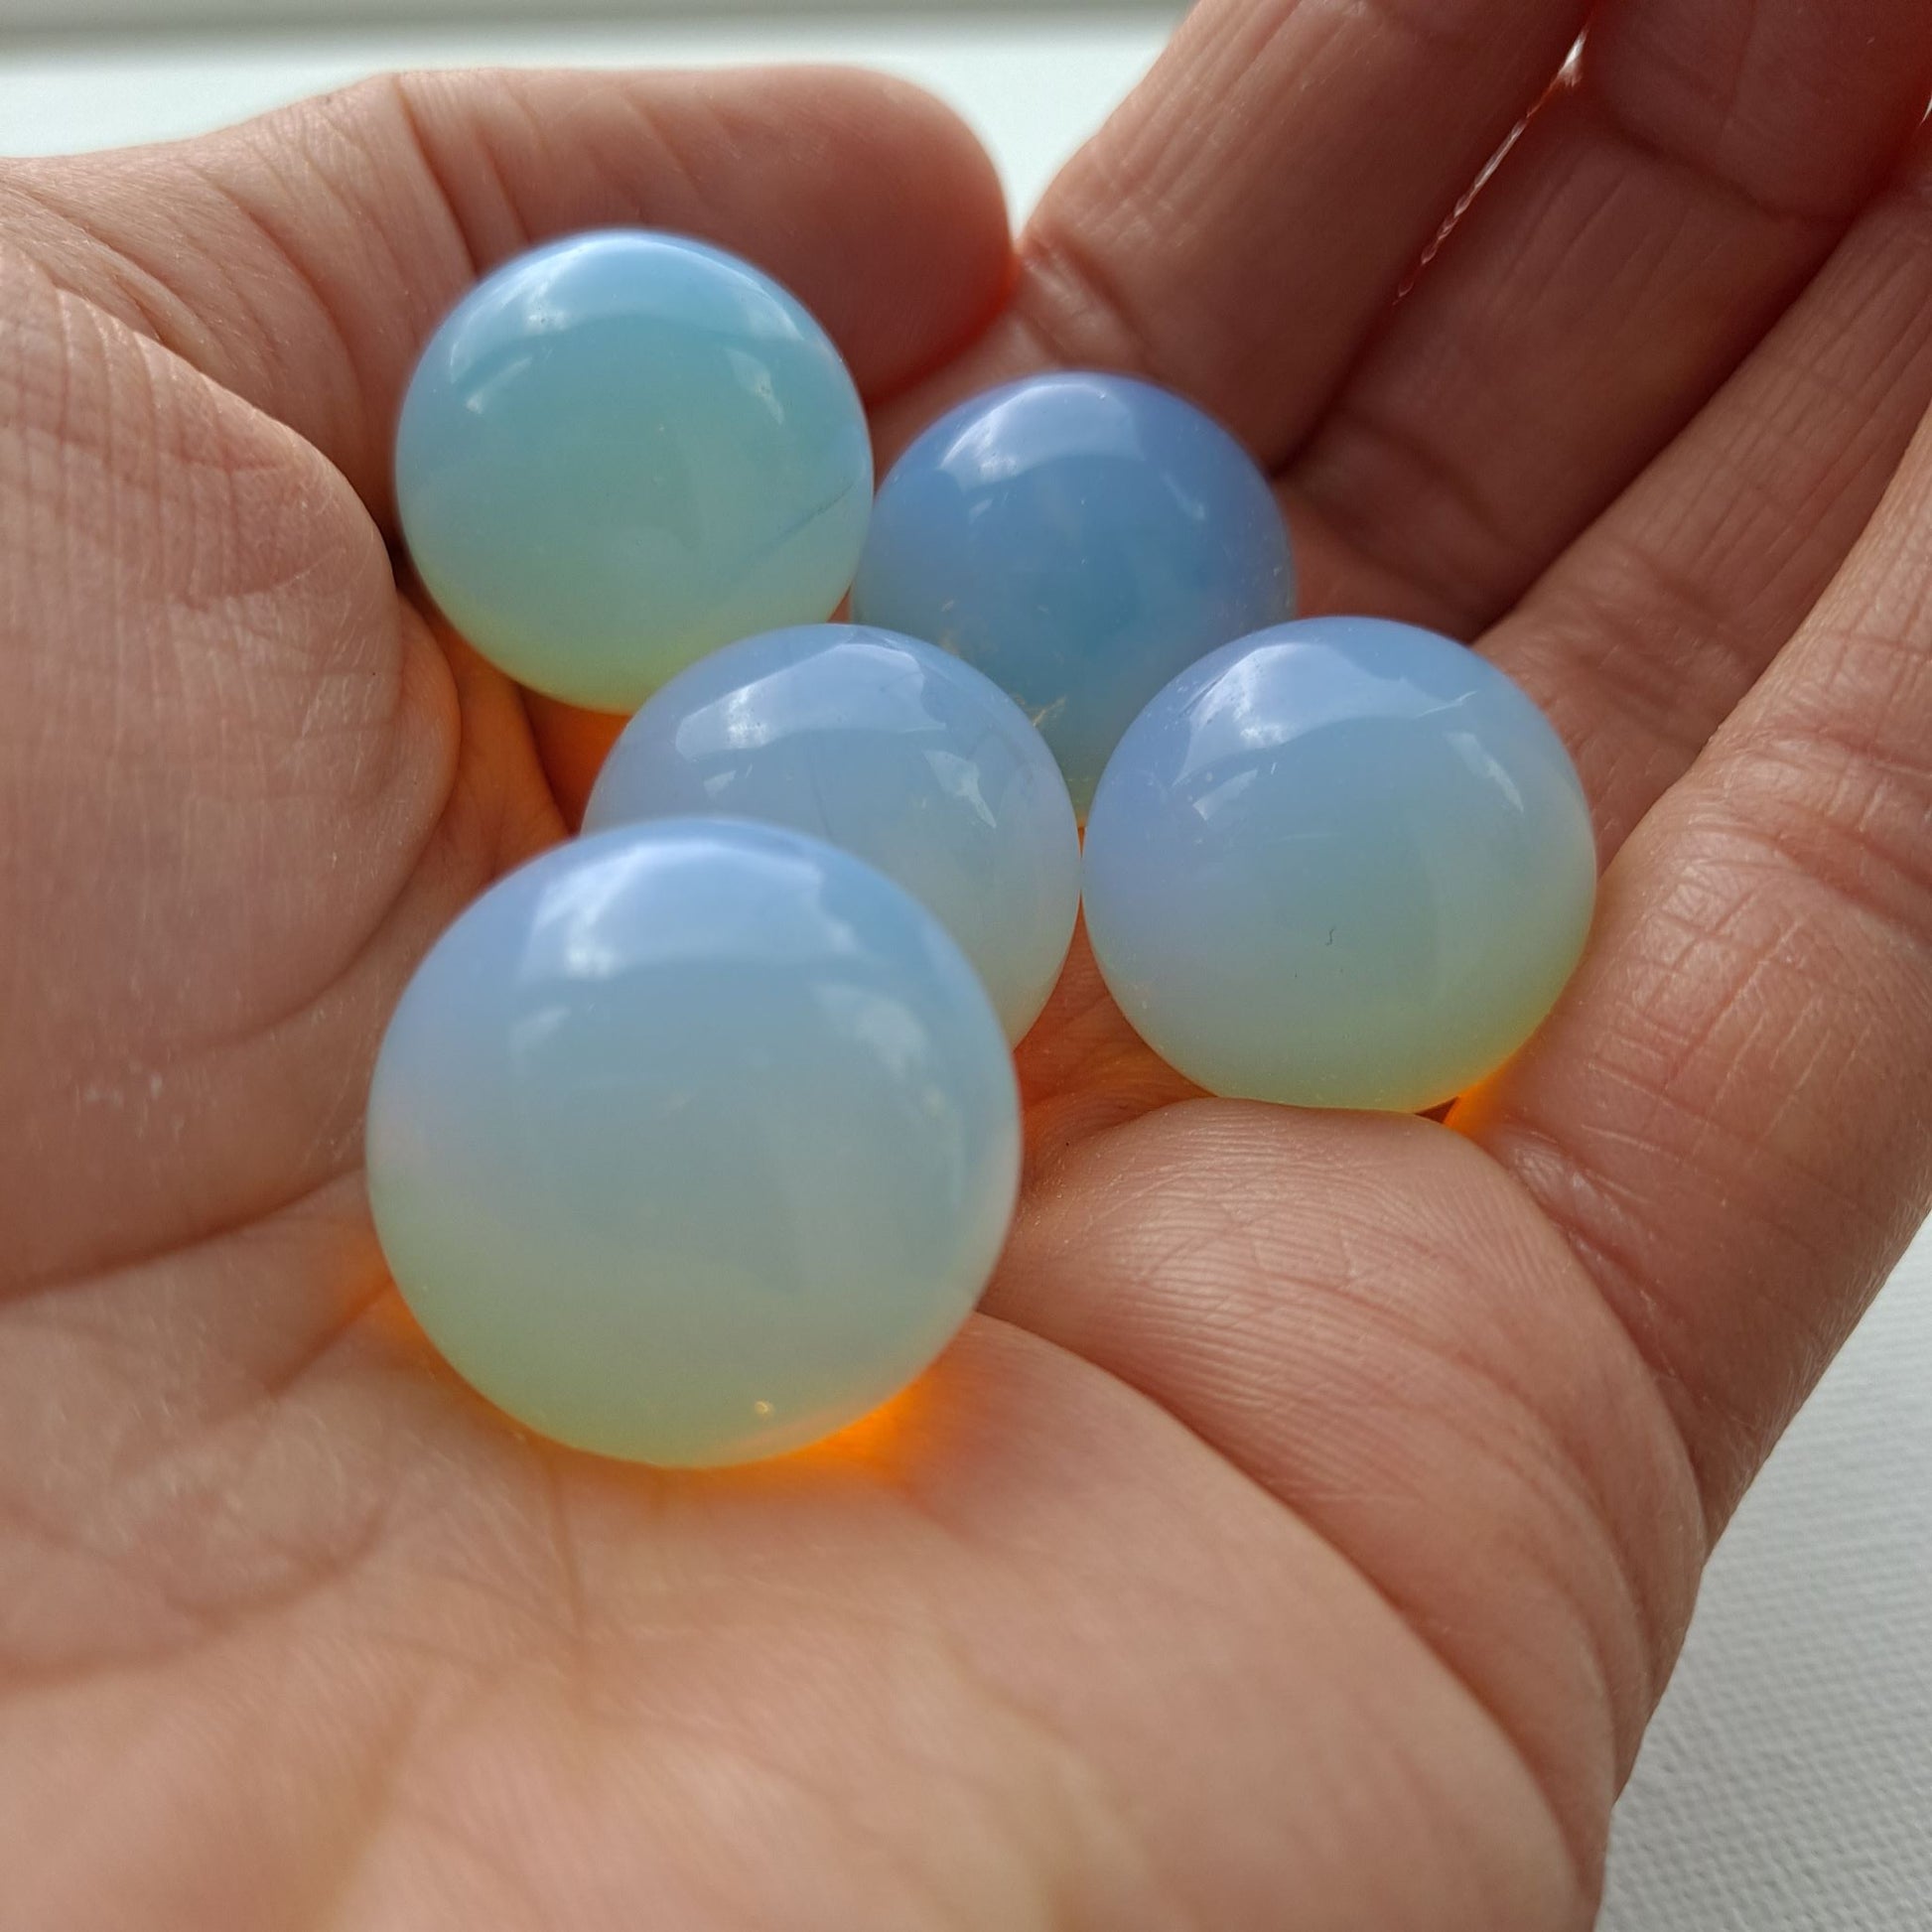  Dumi's Crystals | Opalite Mini Spheres (20mm) | A collection of captivating Opalite Mini Spheres, each displaying a unique variation of color. These 20mm, man-made spheres are believed to promote peace, tranquility, and inner strength. Perfect for meditation, crystal grids, or carrying with you throughout the day.